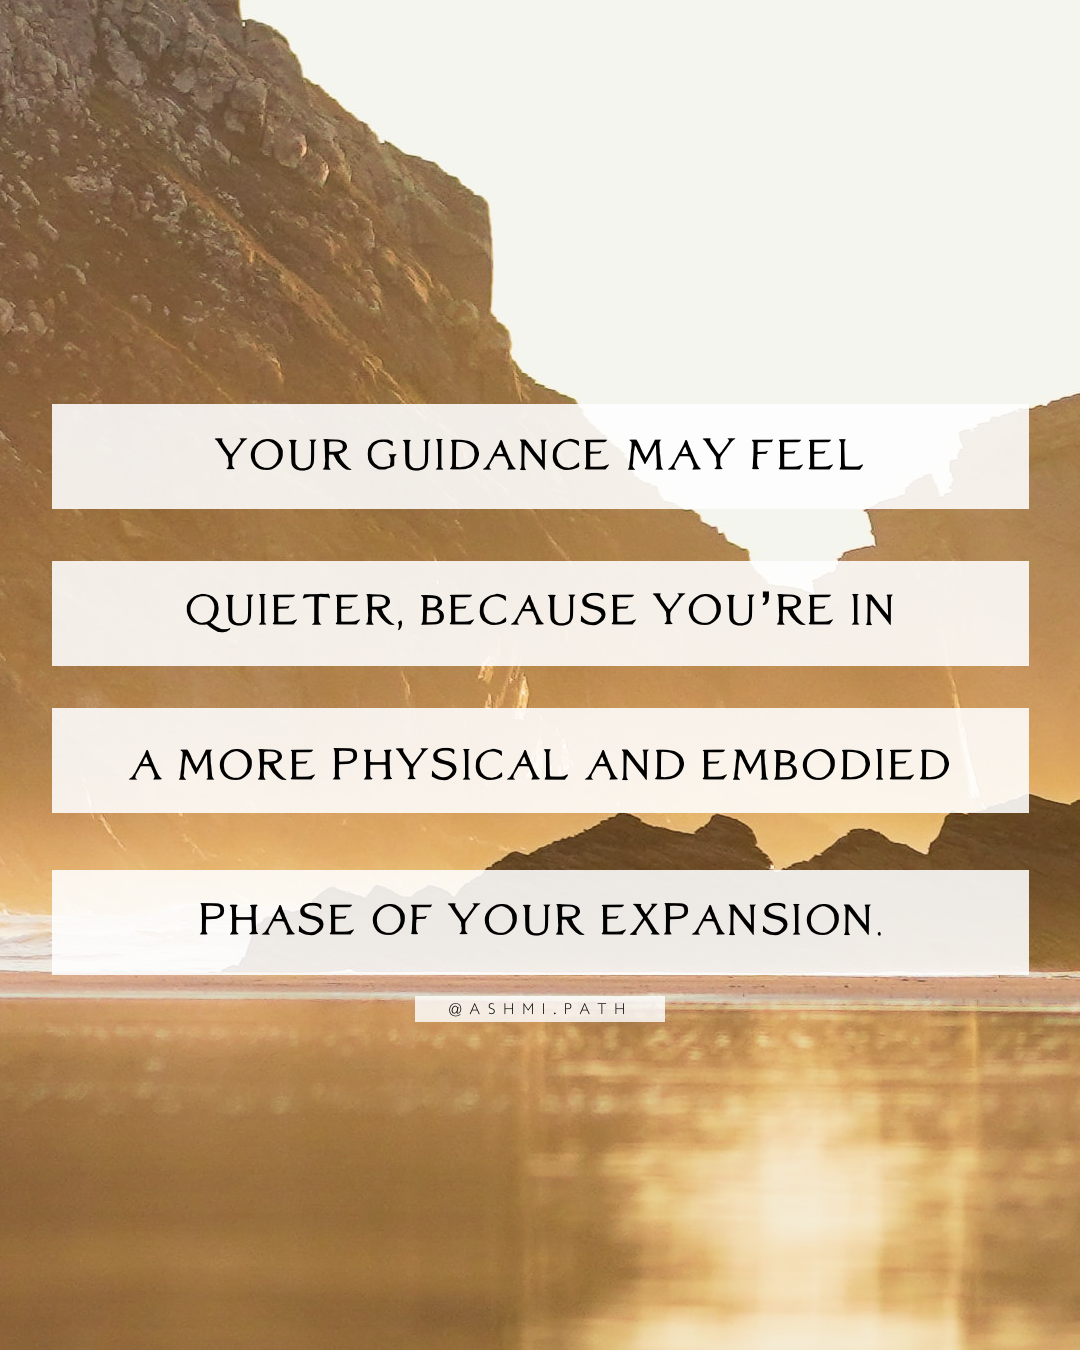 Why Your Guidance Feels Quieter